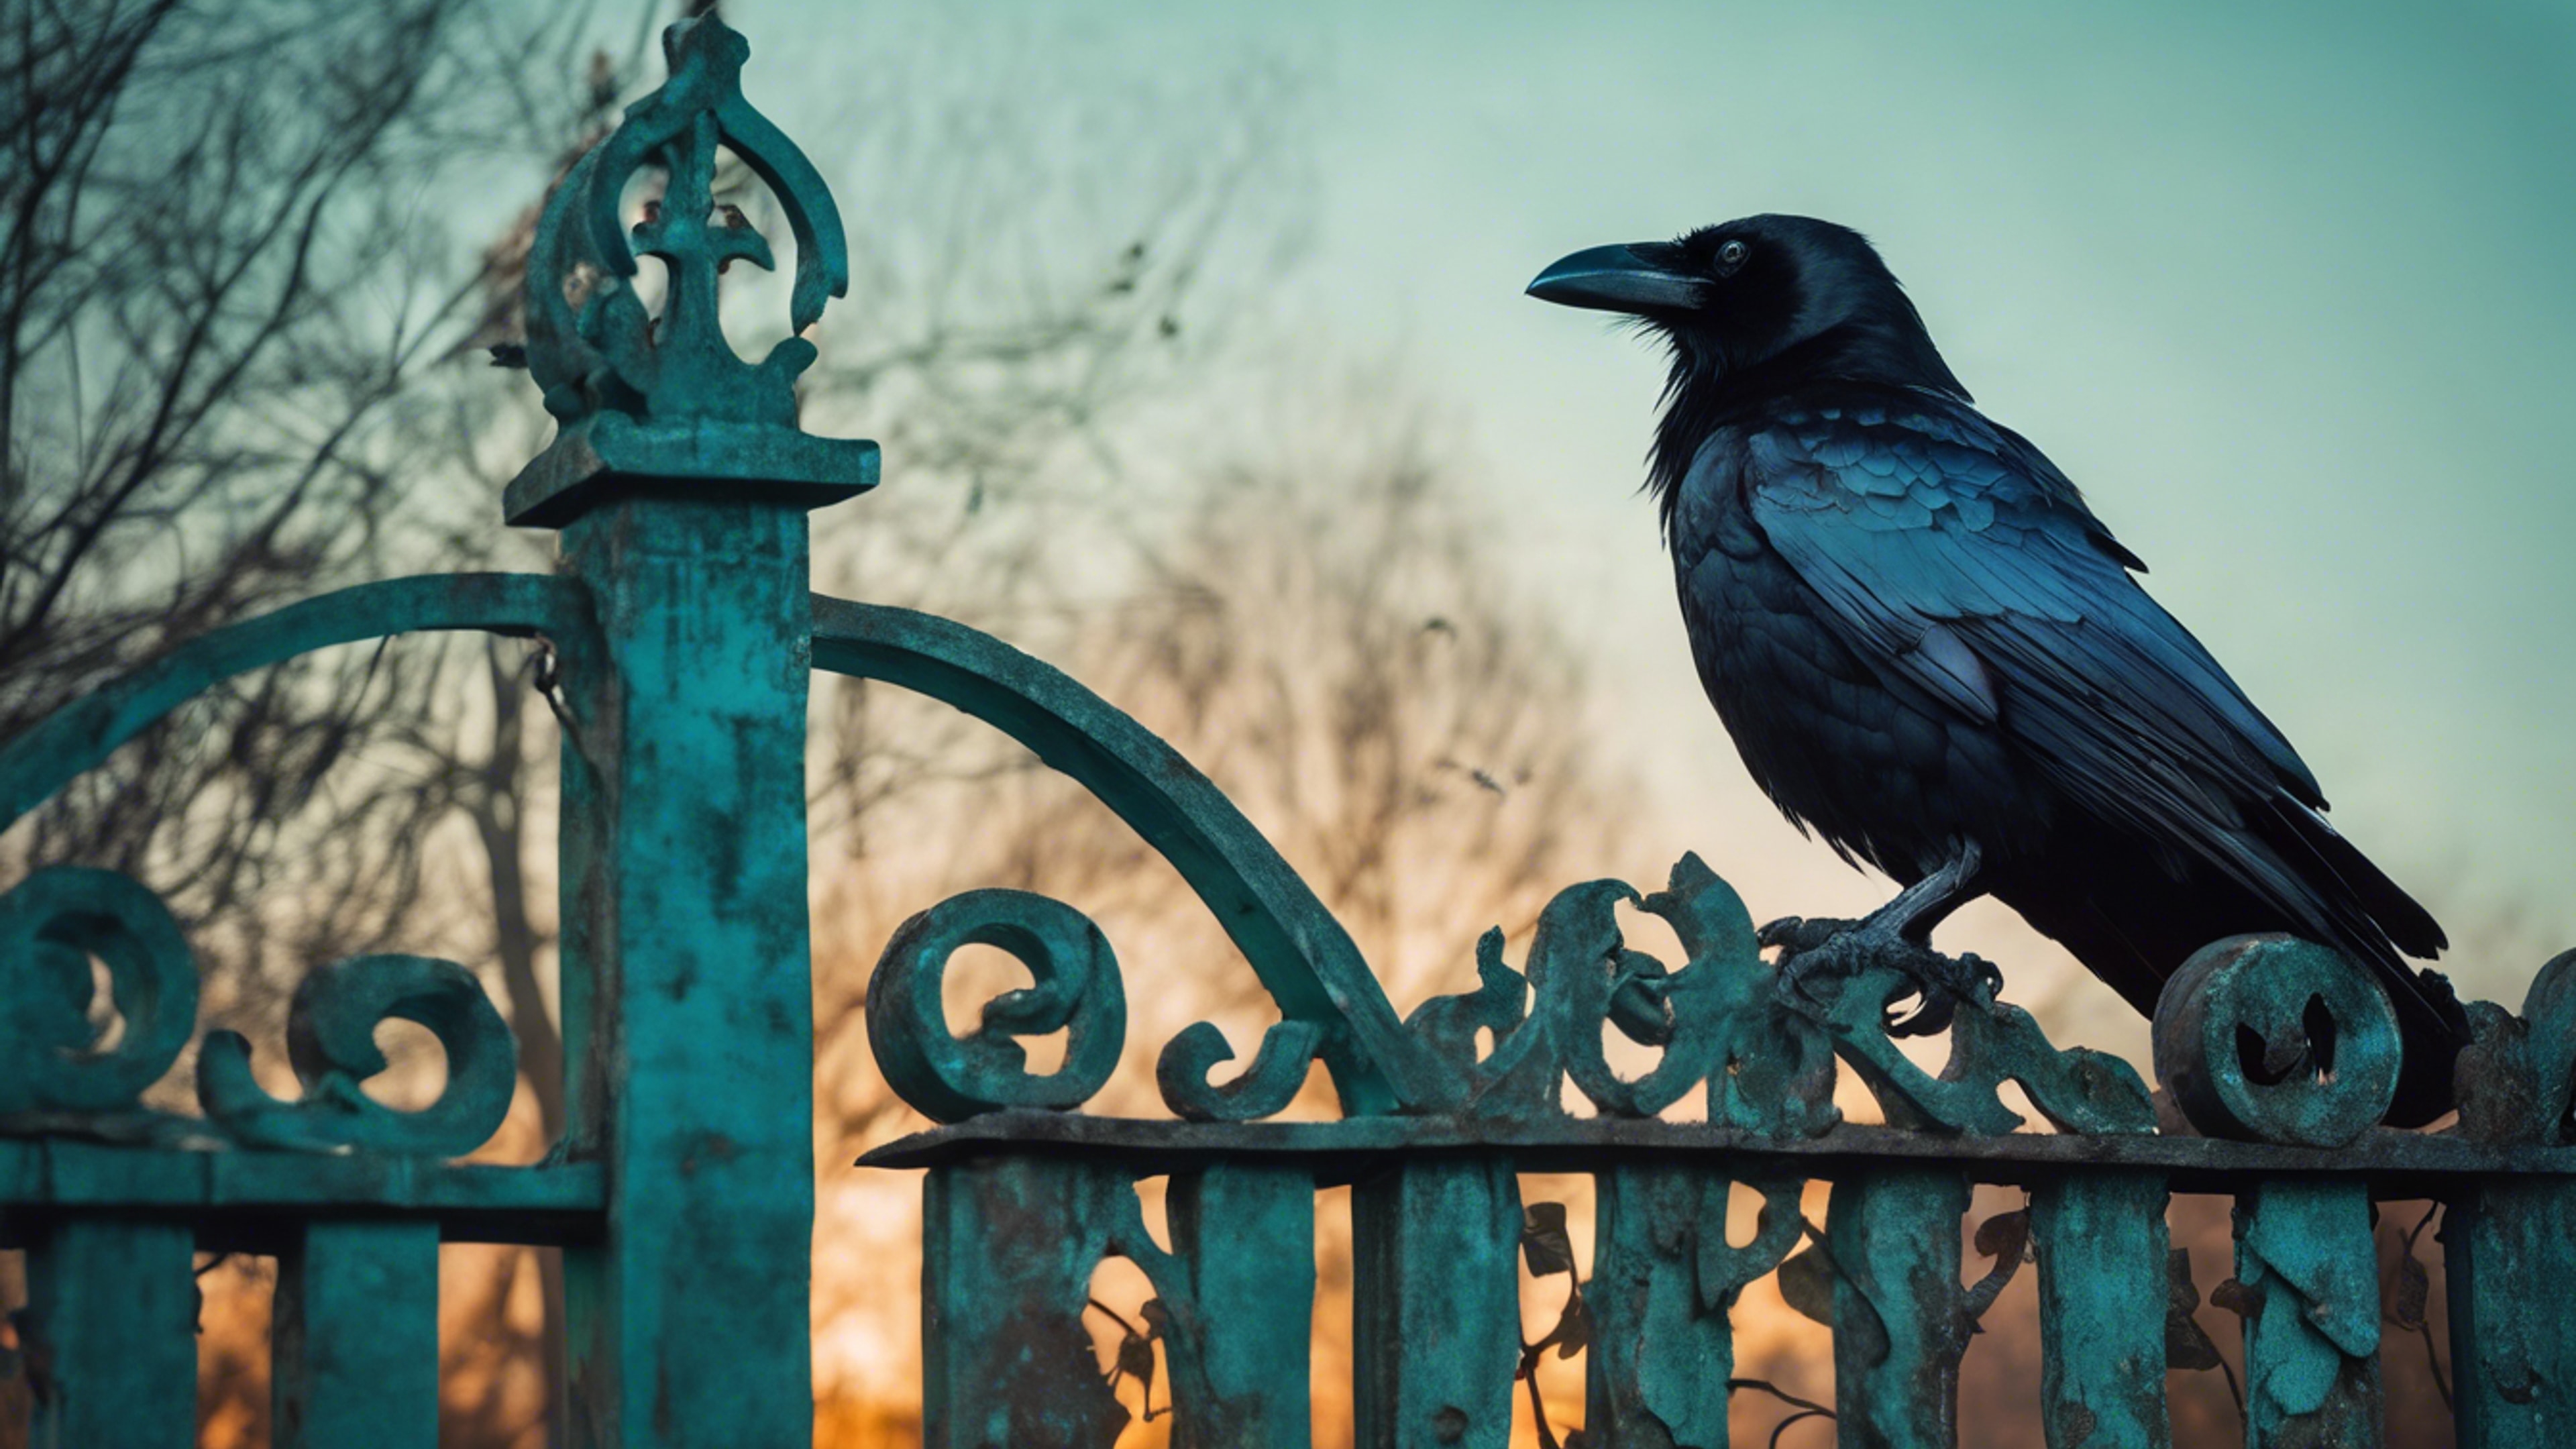 A Gothic raven perched on a dilapidated garden gate, aglow with the mesmerizing light of a teal moon. Wallpaper[c5fc313733614ce1ad34]